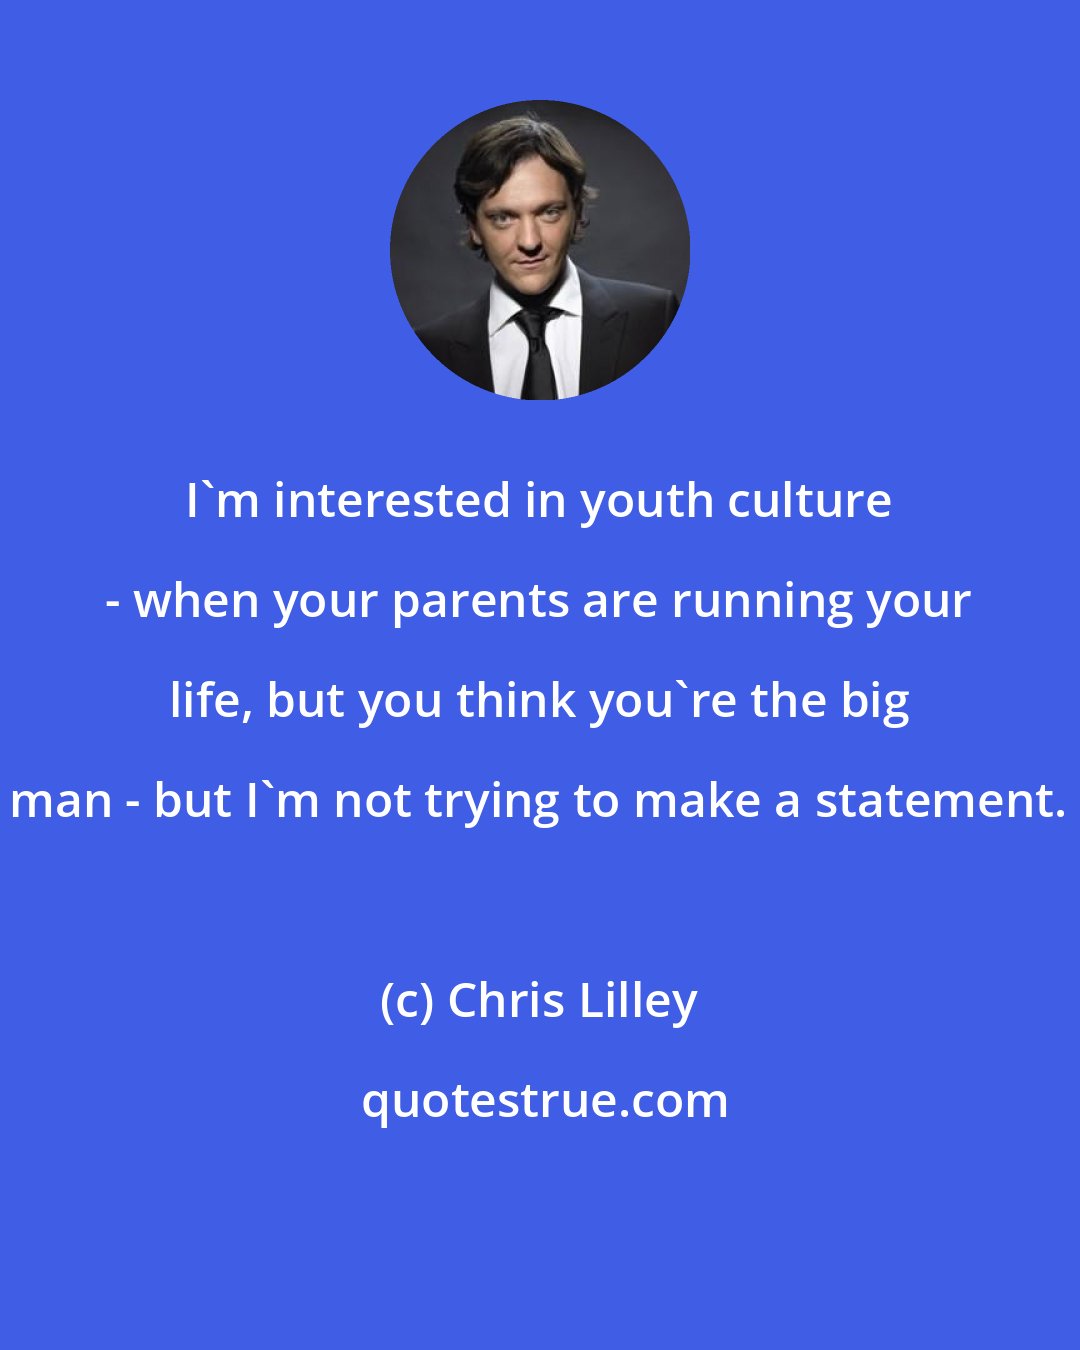 Chris Lilley: I'm interested in youth culture - when your parents are running your life, but you think you're the big man - but I'm not trying to make a statement.